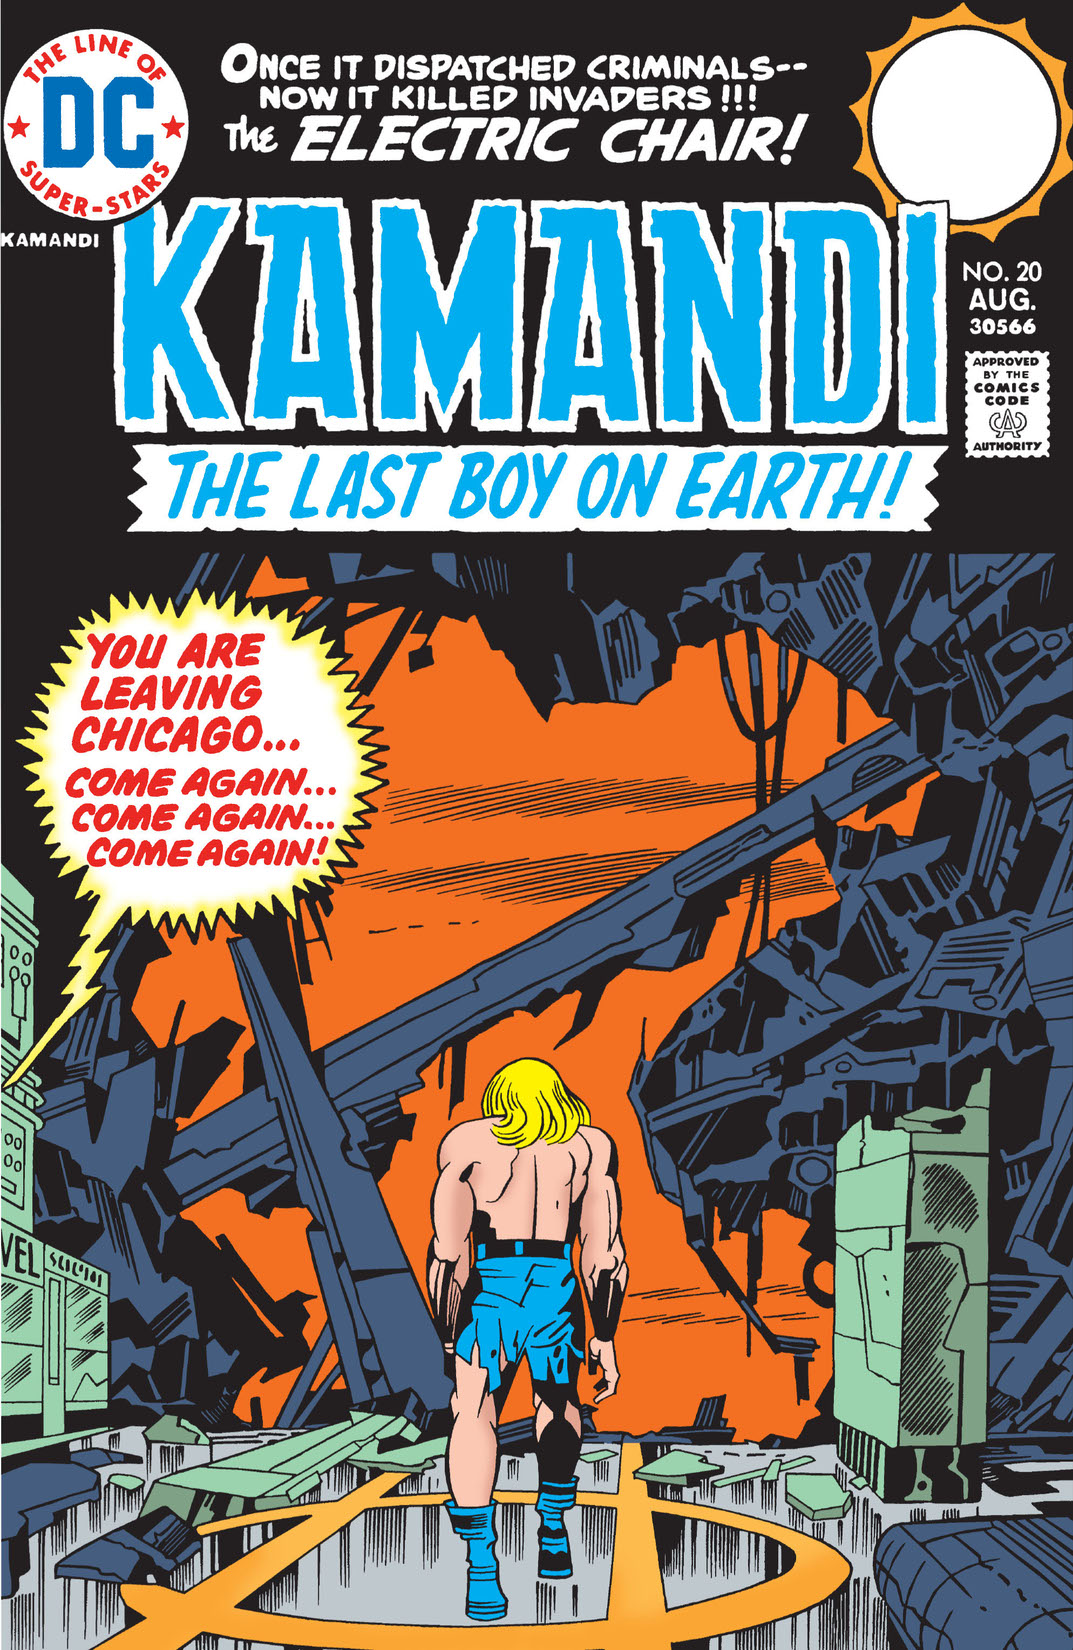 Kamandi: The Last Boy on Earth #20 preview images